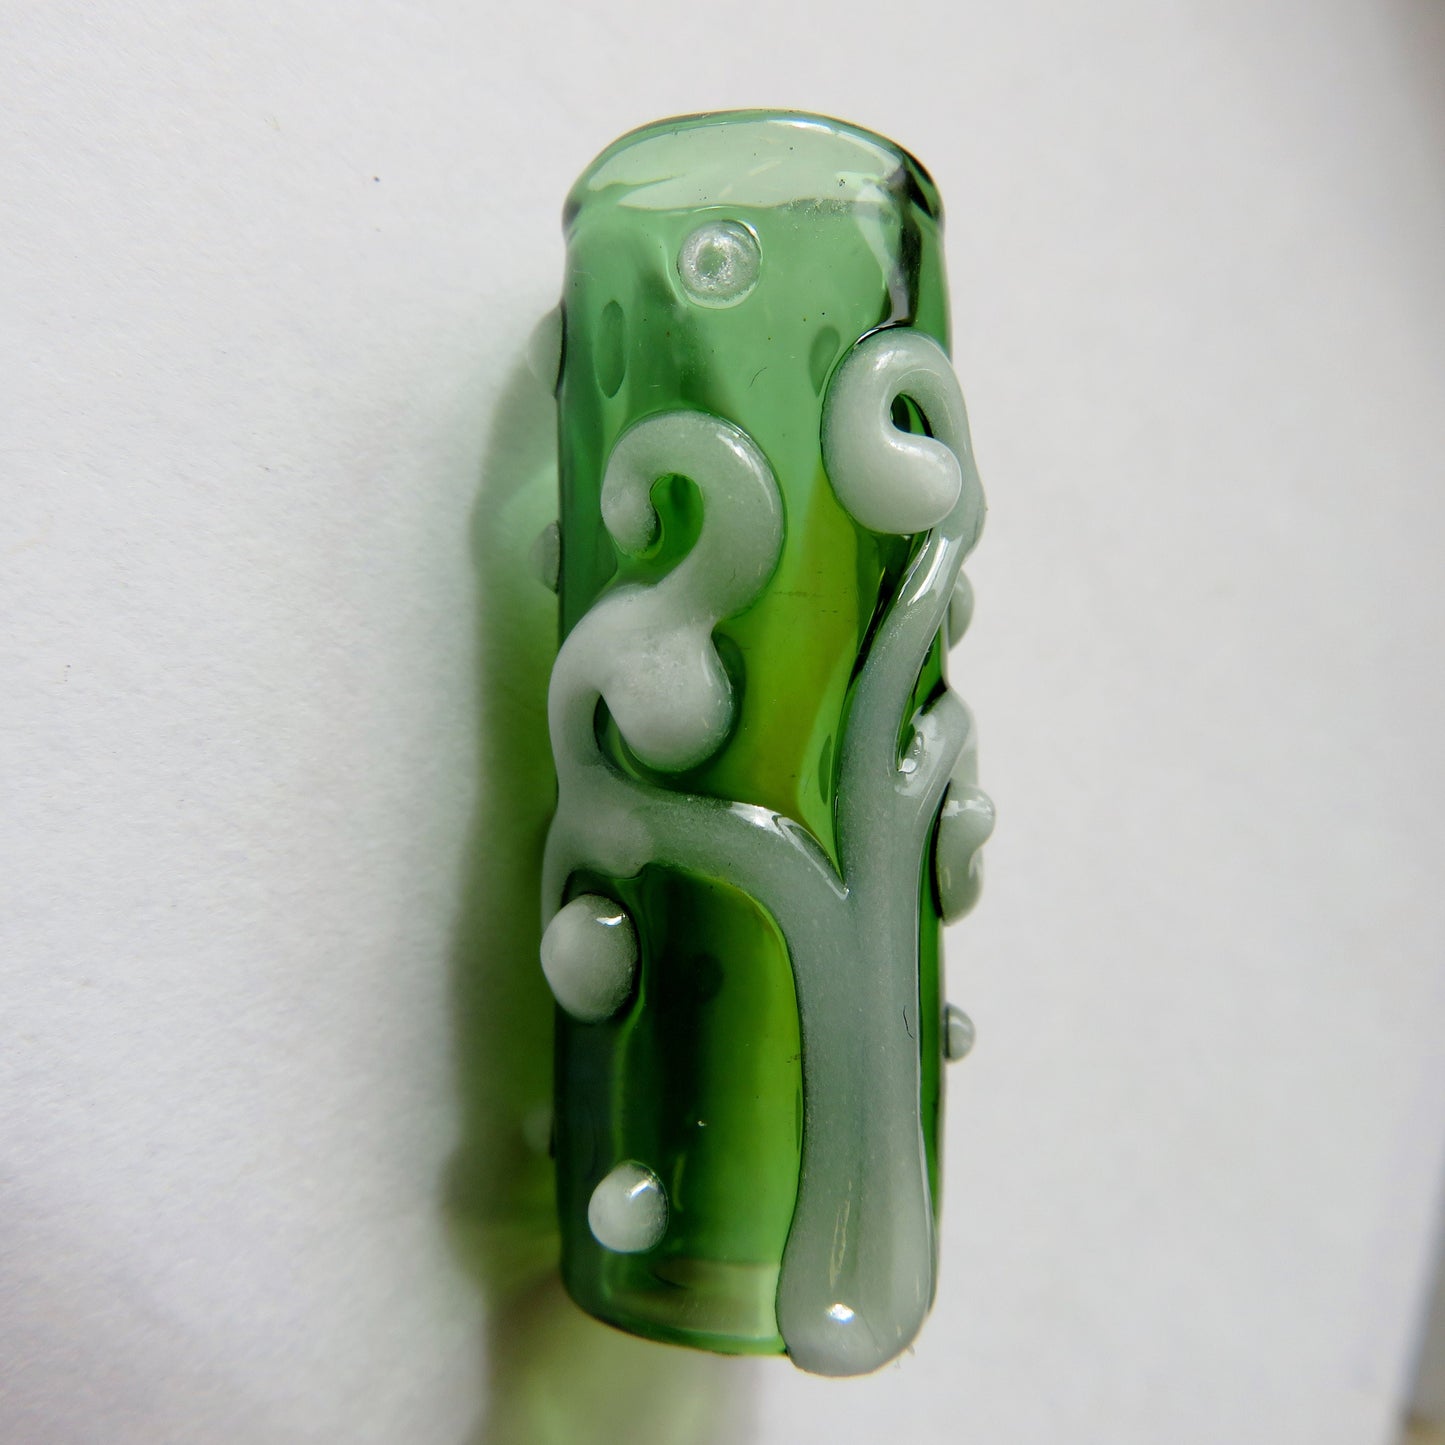 Glow in the Dark Spiral Tree on transparent green 8mm Bead Hole small size, Hand Blown Glass Dread Bead